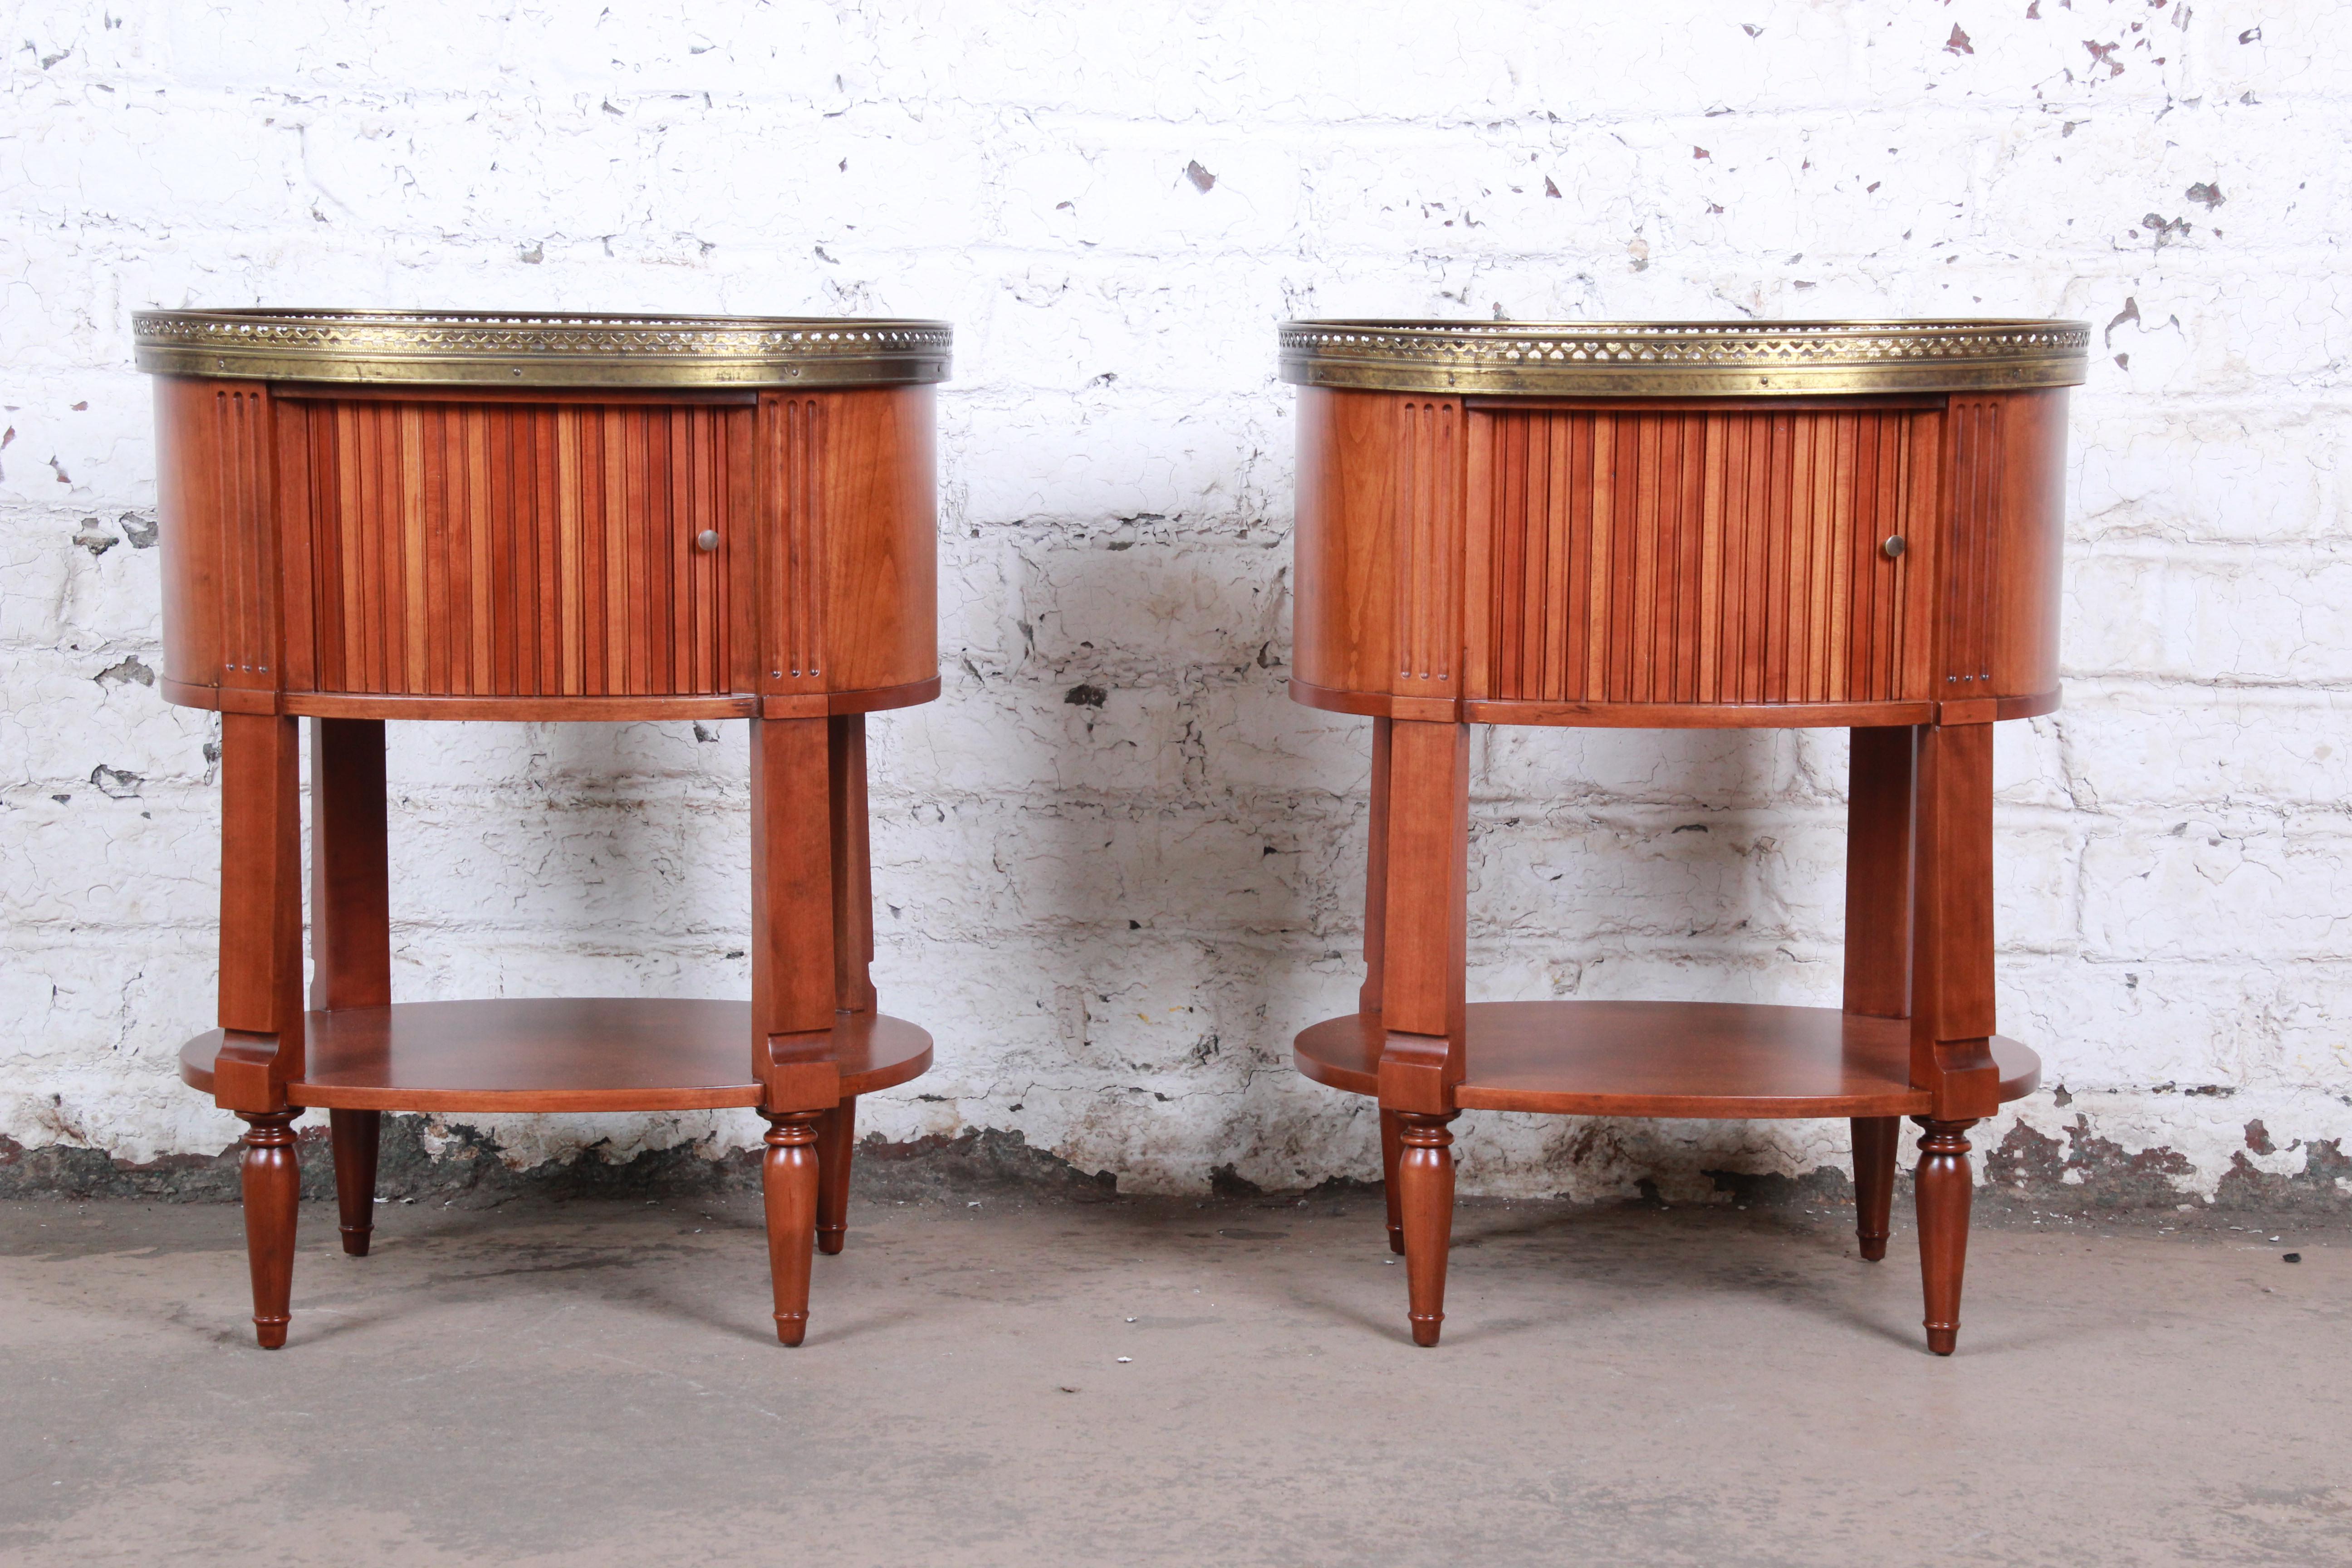 An exceptional pair of French Regency Louis XVI nightstands or end tables by Baker Furniture. The nightstands feature gorgeous cherry wood grain and a pierced brass gallery. They each have cabinet space behind a tambour door and a lower shelf. The